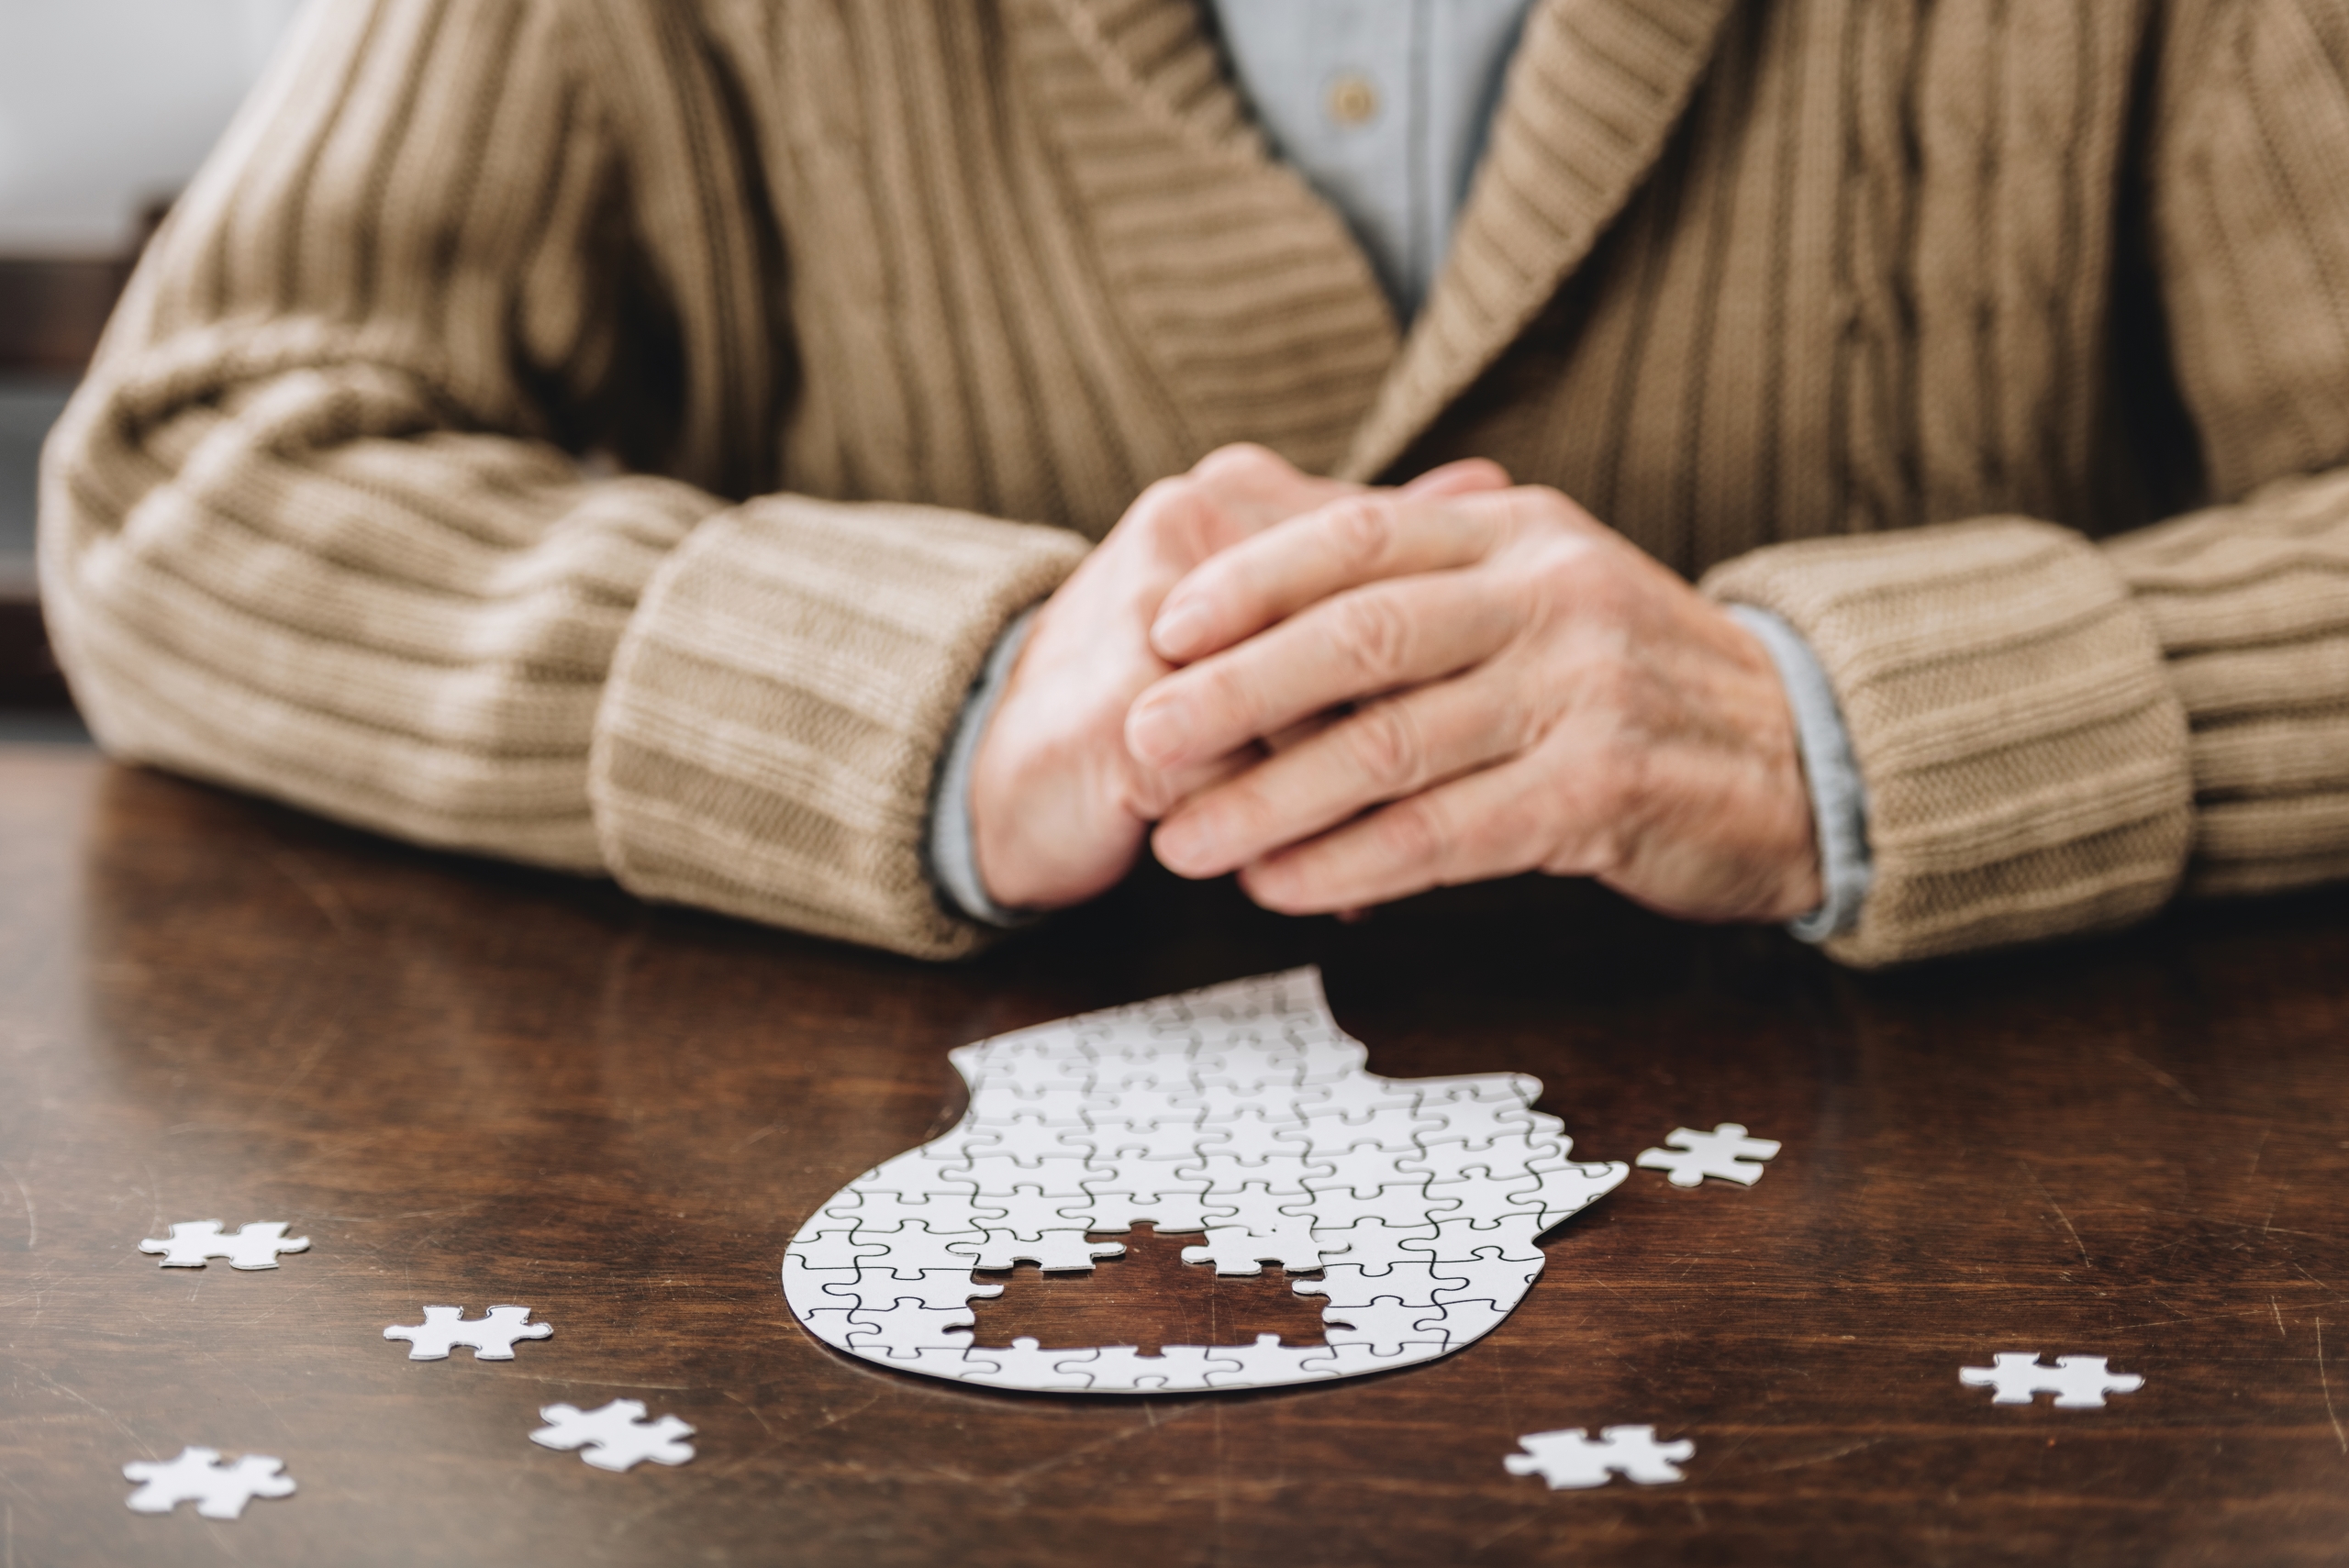 older person working on a jigsaw puzzle